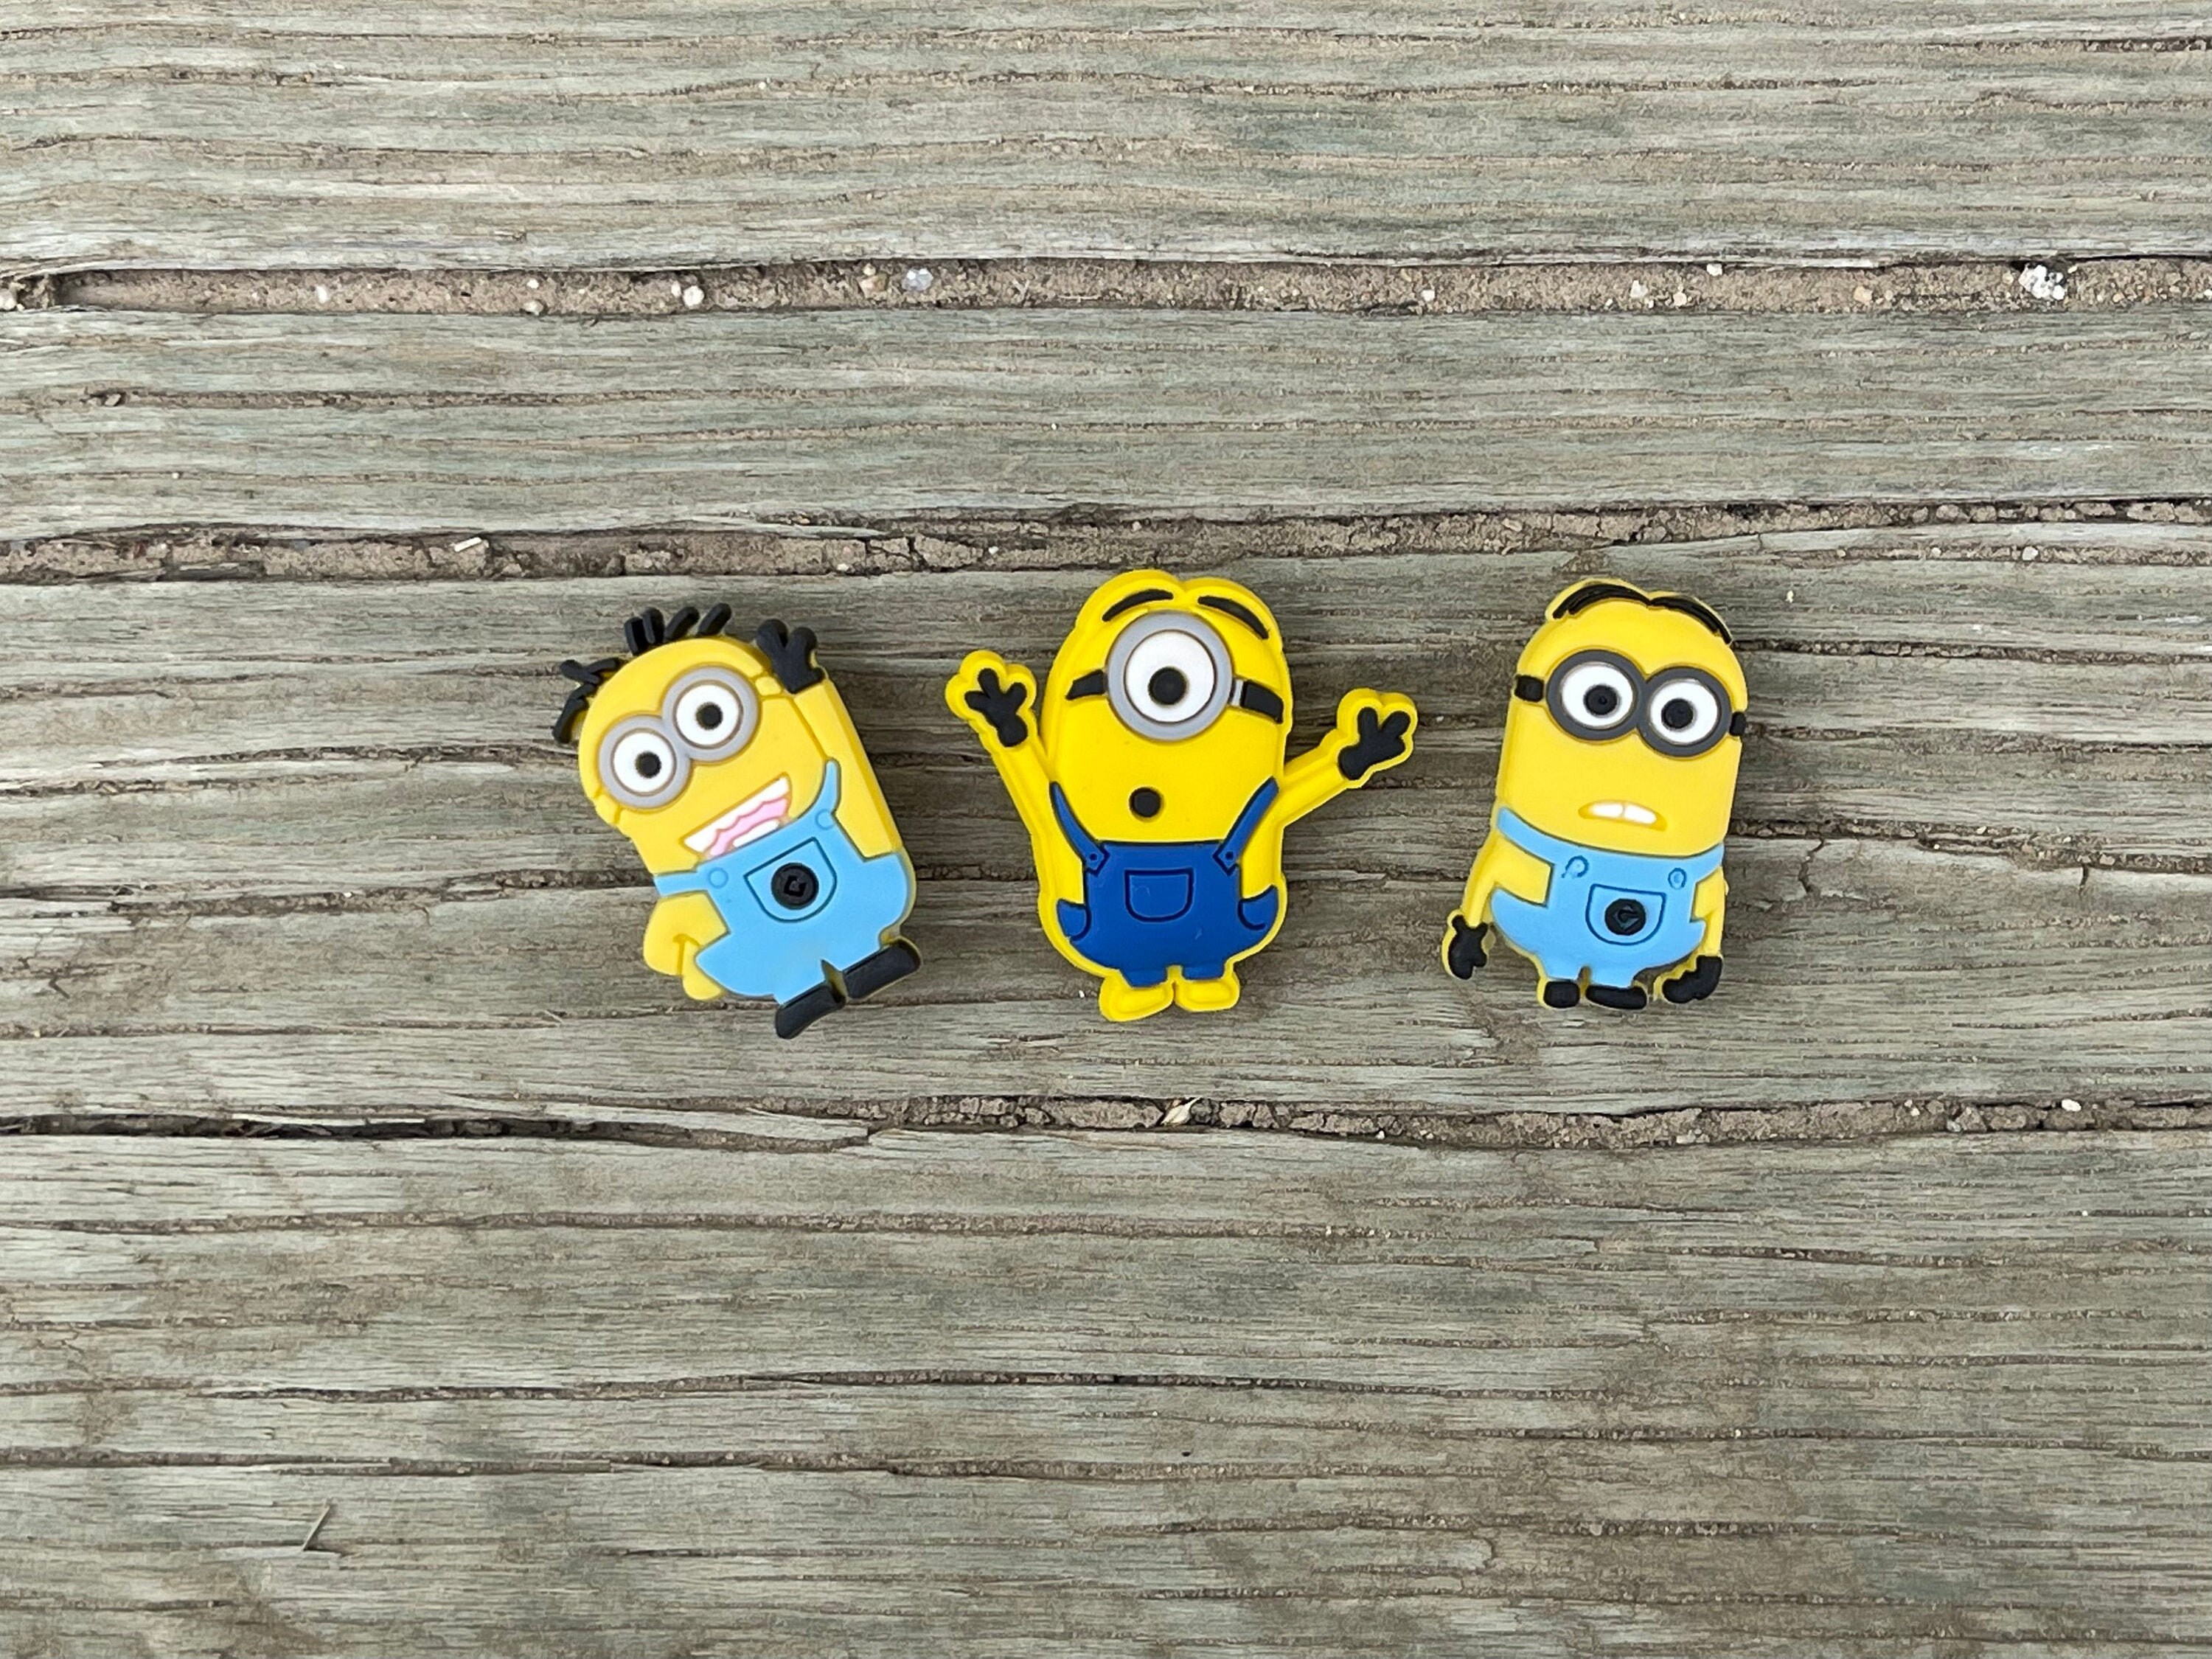 FAST USA SHIPPING! Set of 3 CAVEMAN MINIONS shoe charms/cake toppers!! 